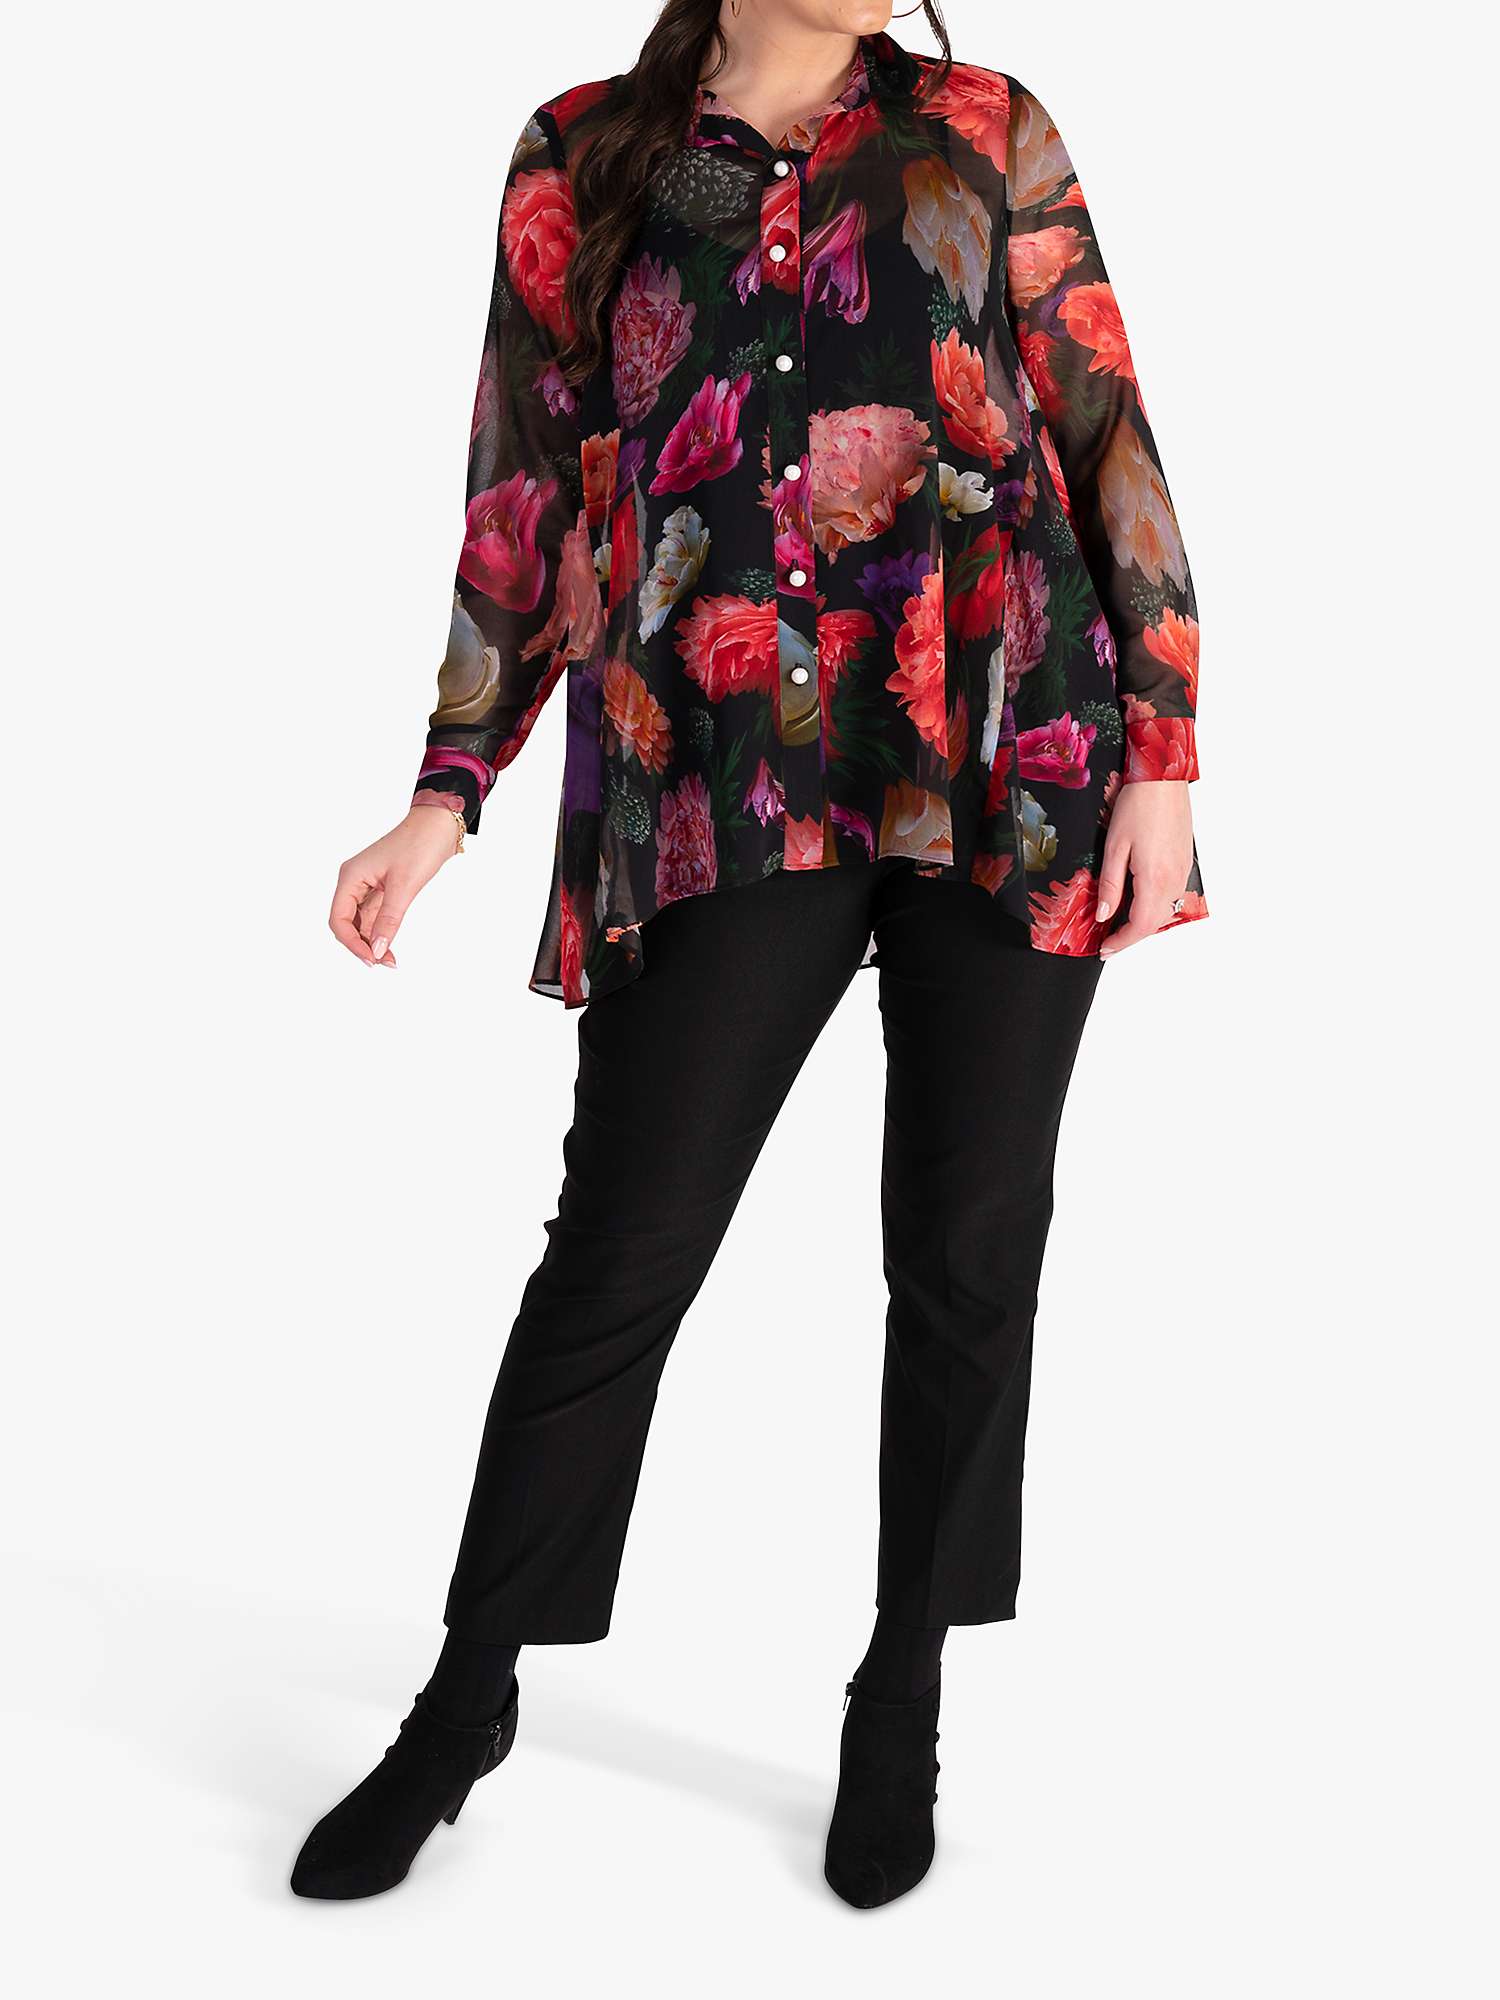 Buy chesa Rose Bouquet Print Blouse with Back Pleat Detail, Black/Multi Online at johnlewis.com